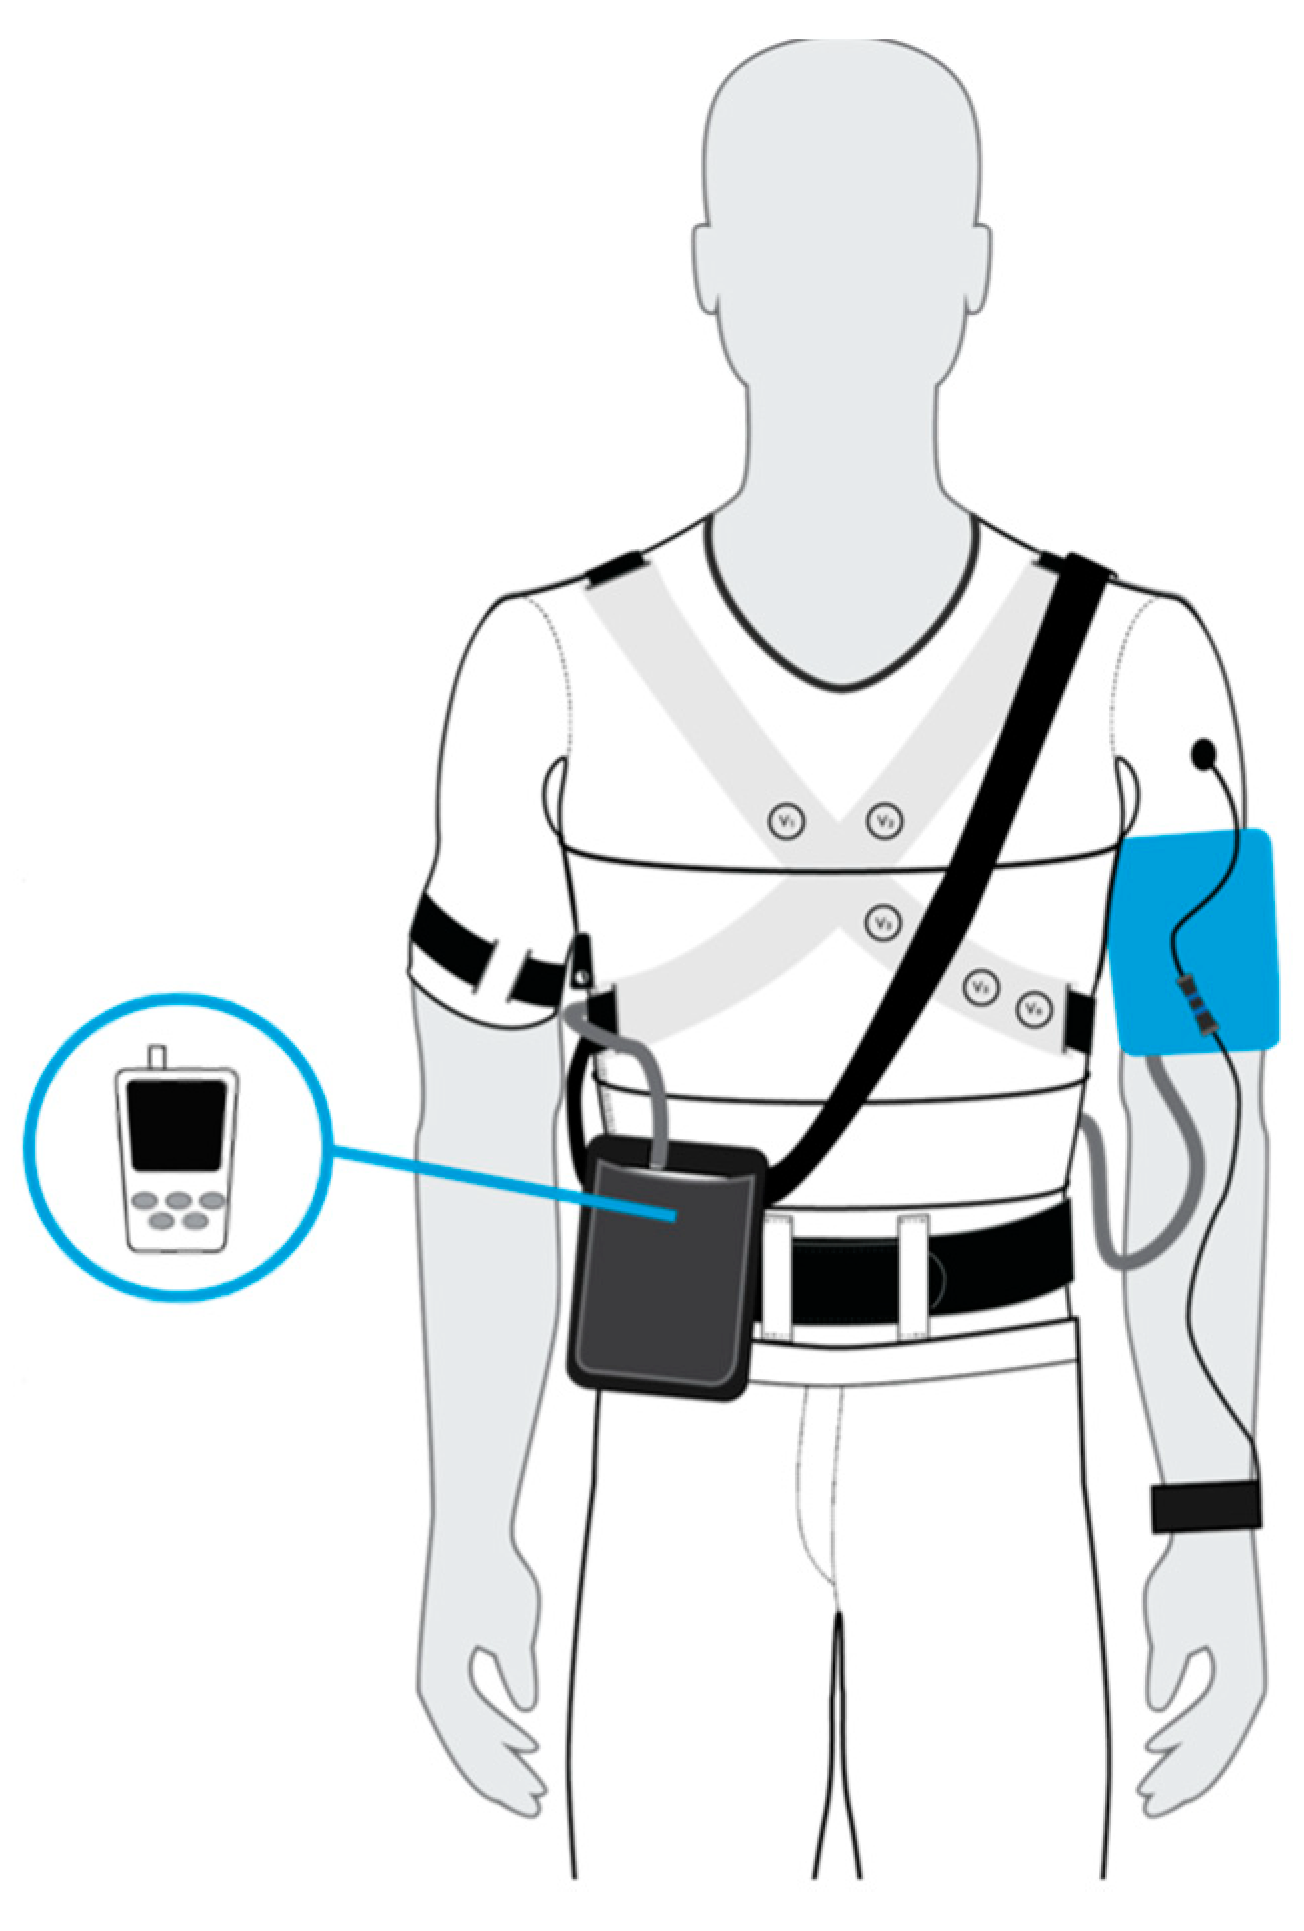 Ambulatory blood pressure monitor with PC software for 24h continuous  monitoring with 3 Cuffs 